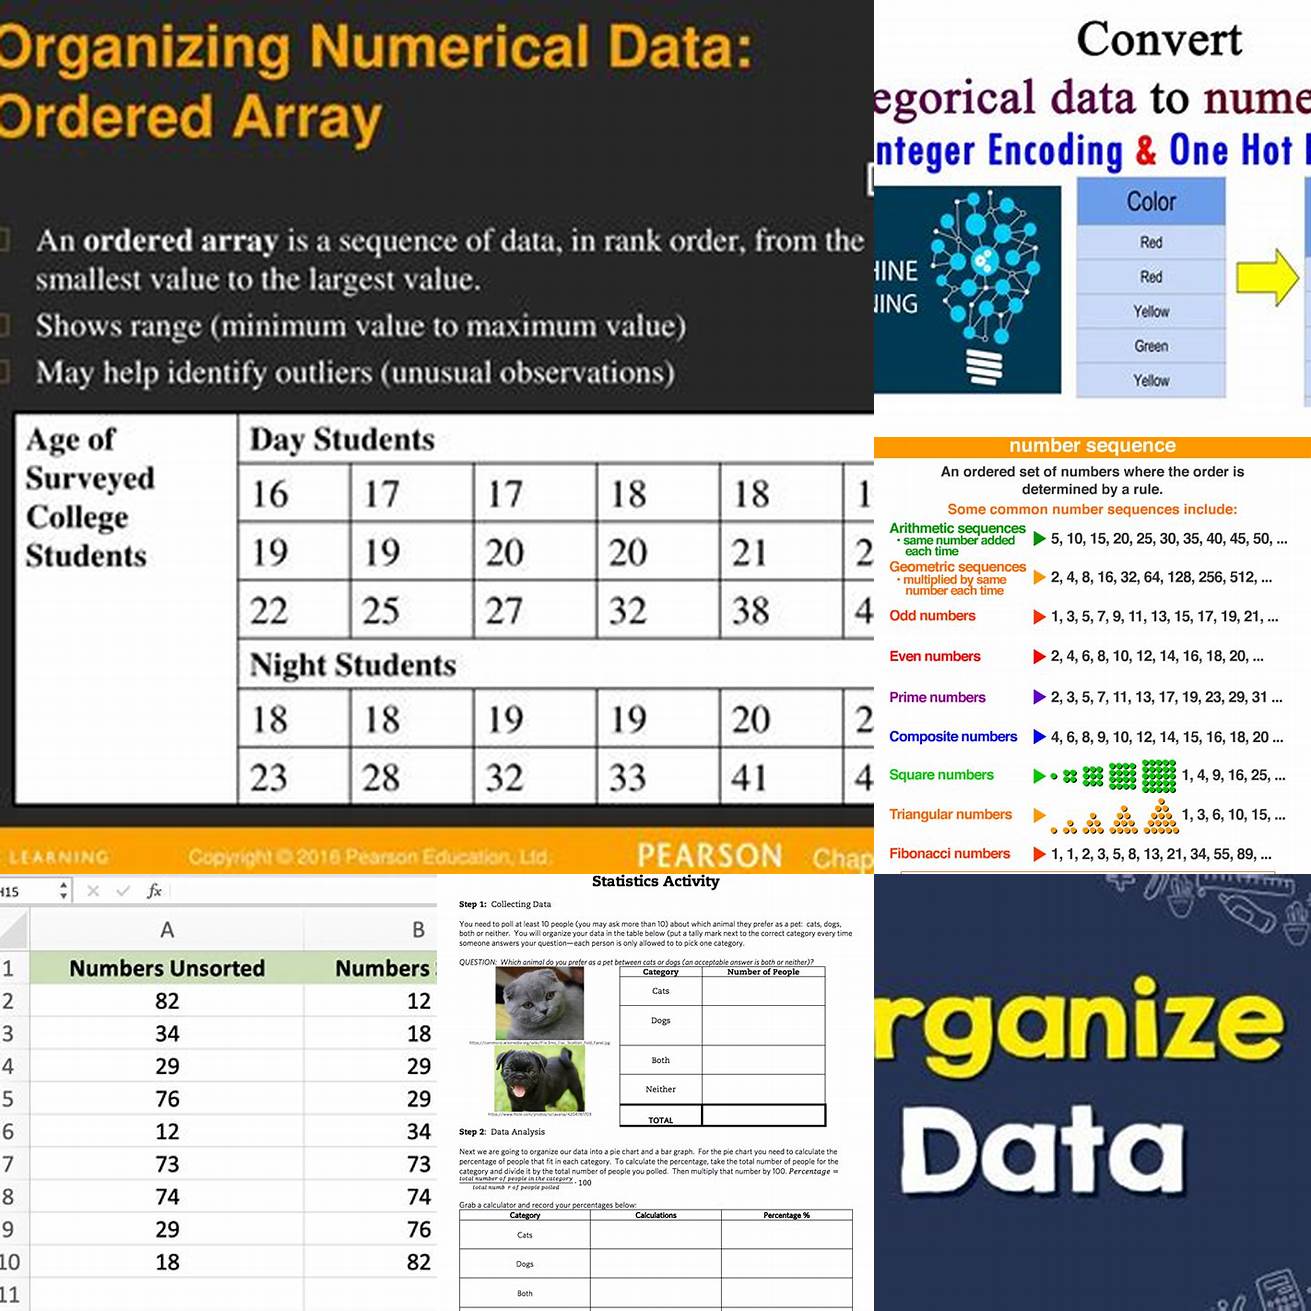 Organize the data into numerical order